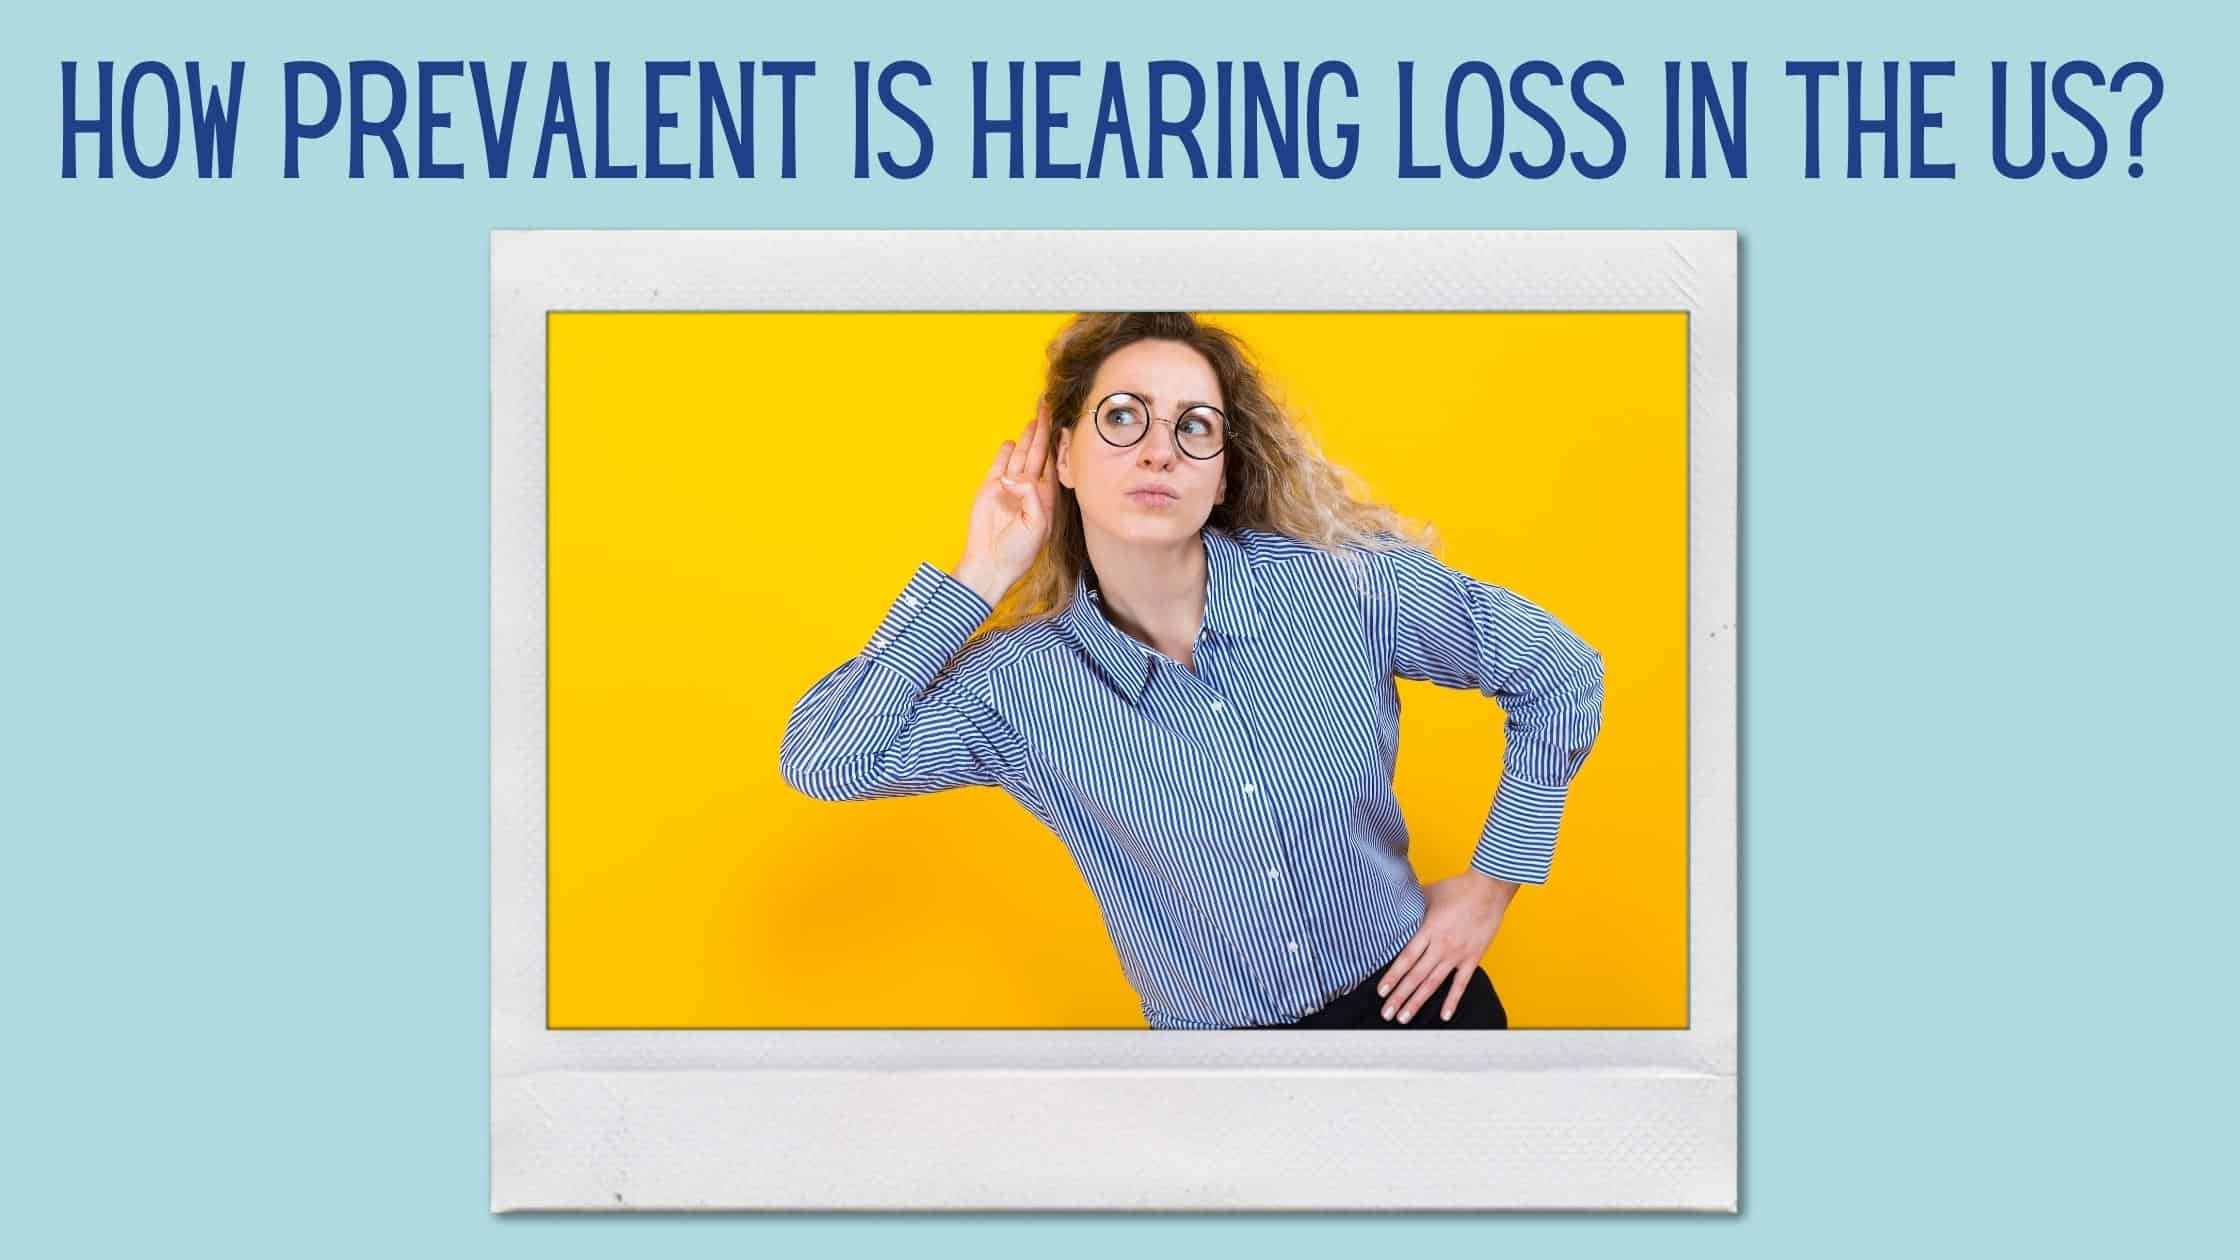 How Prevalent is Hearing Loss in the US